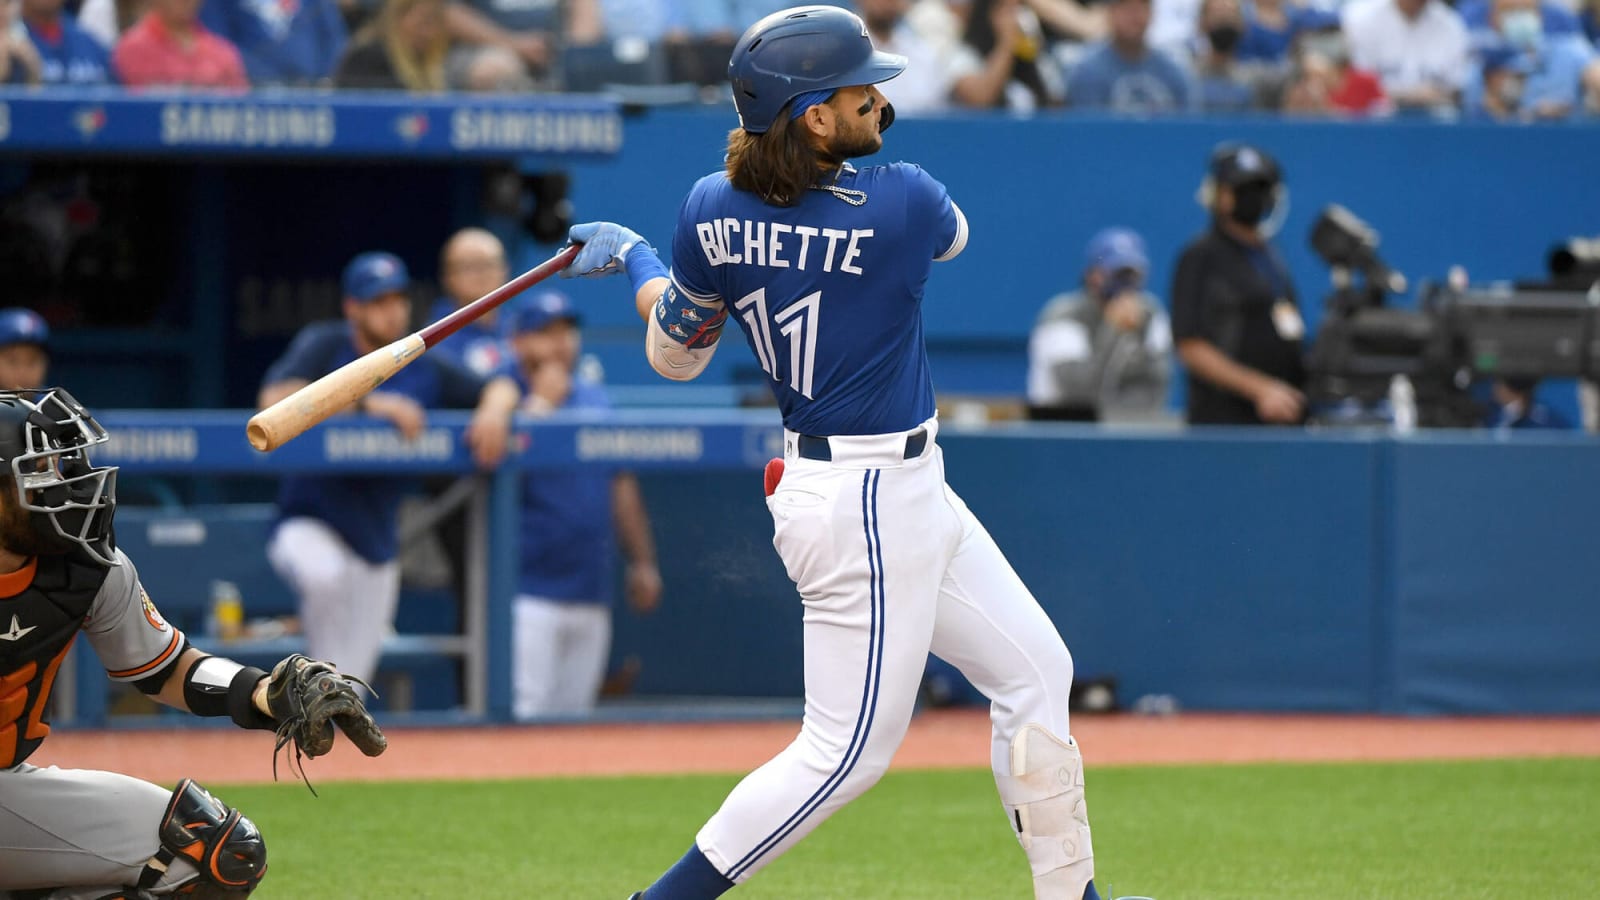 Pre-Series Notes: Bichette moves back up the lineup, Zach Pop recalled